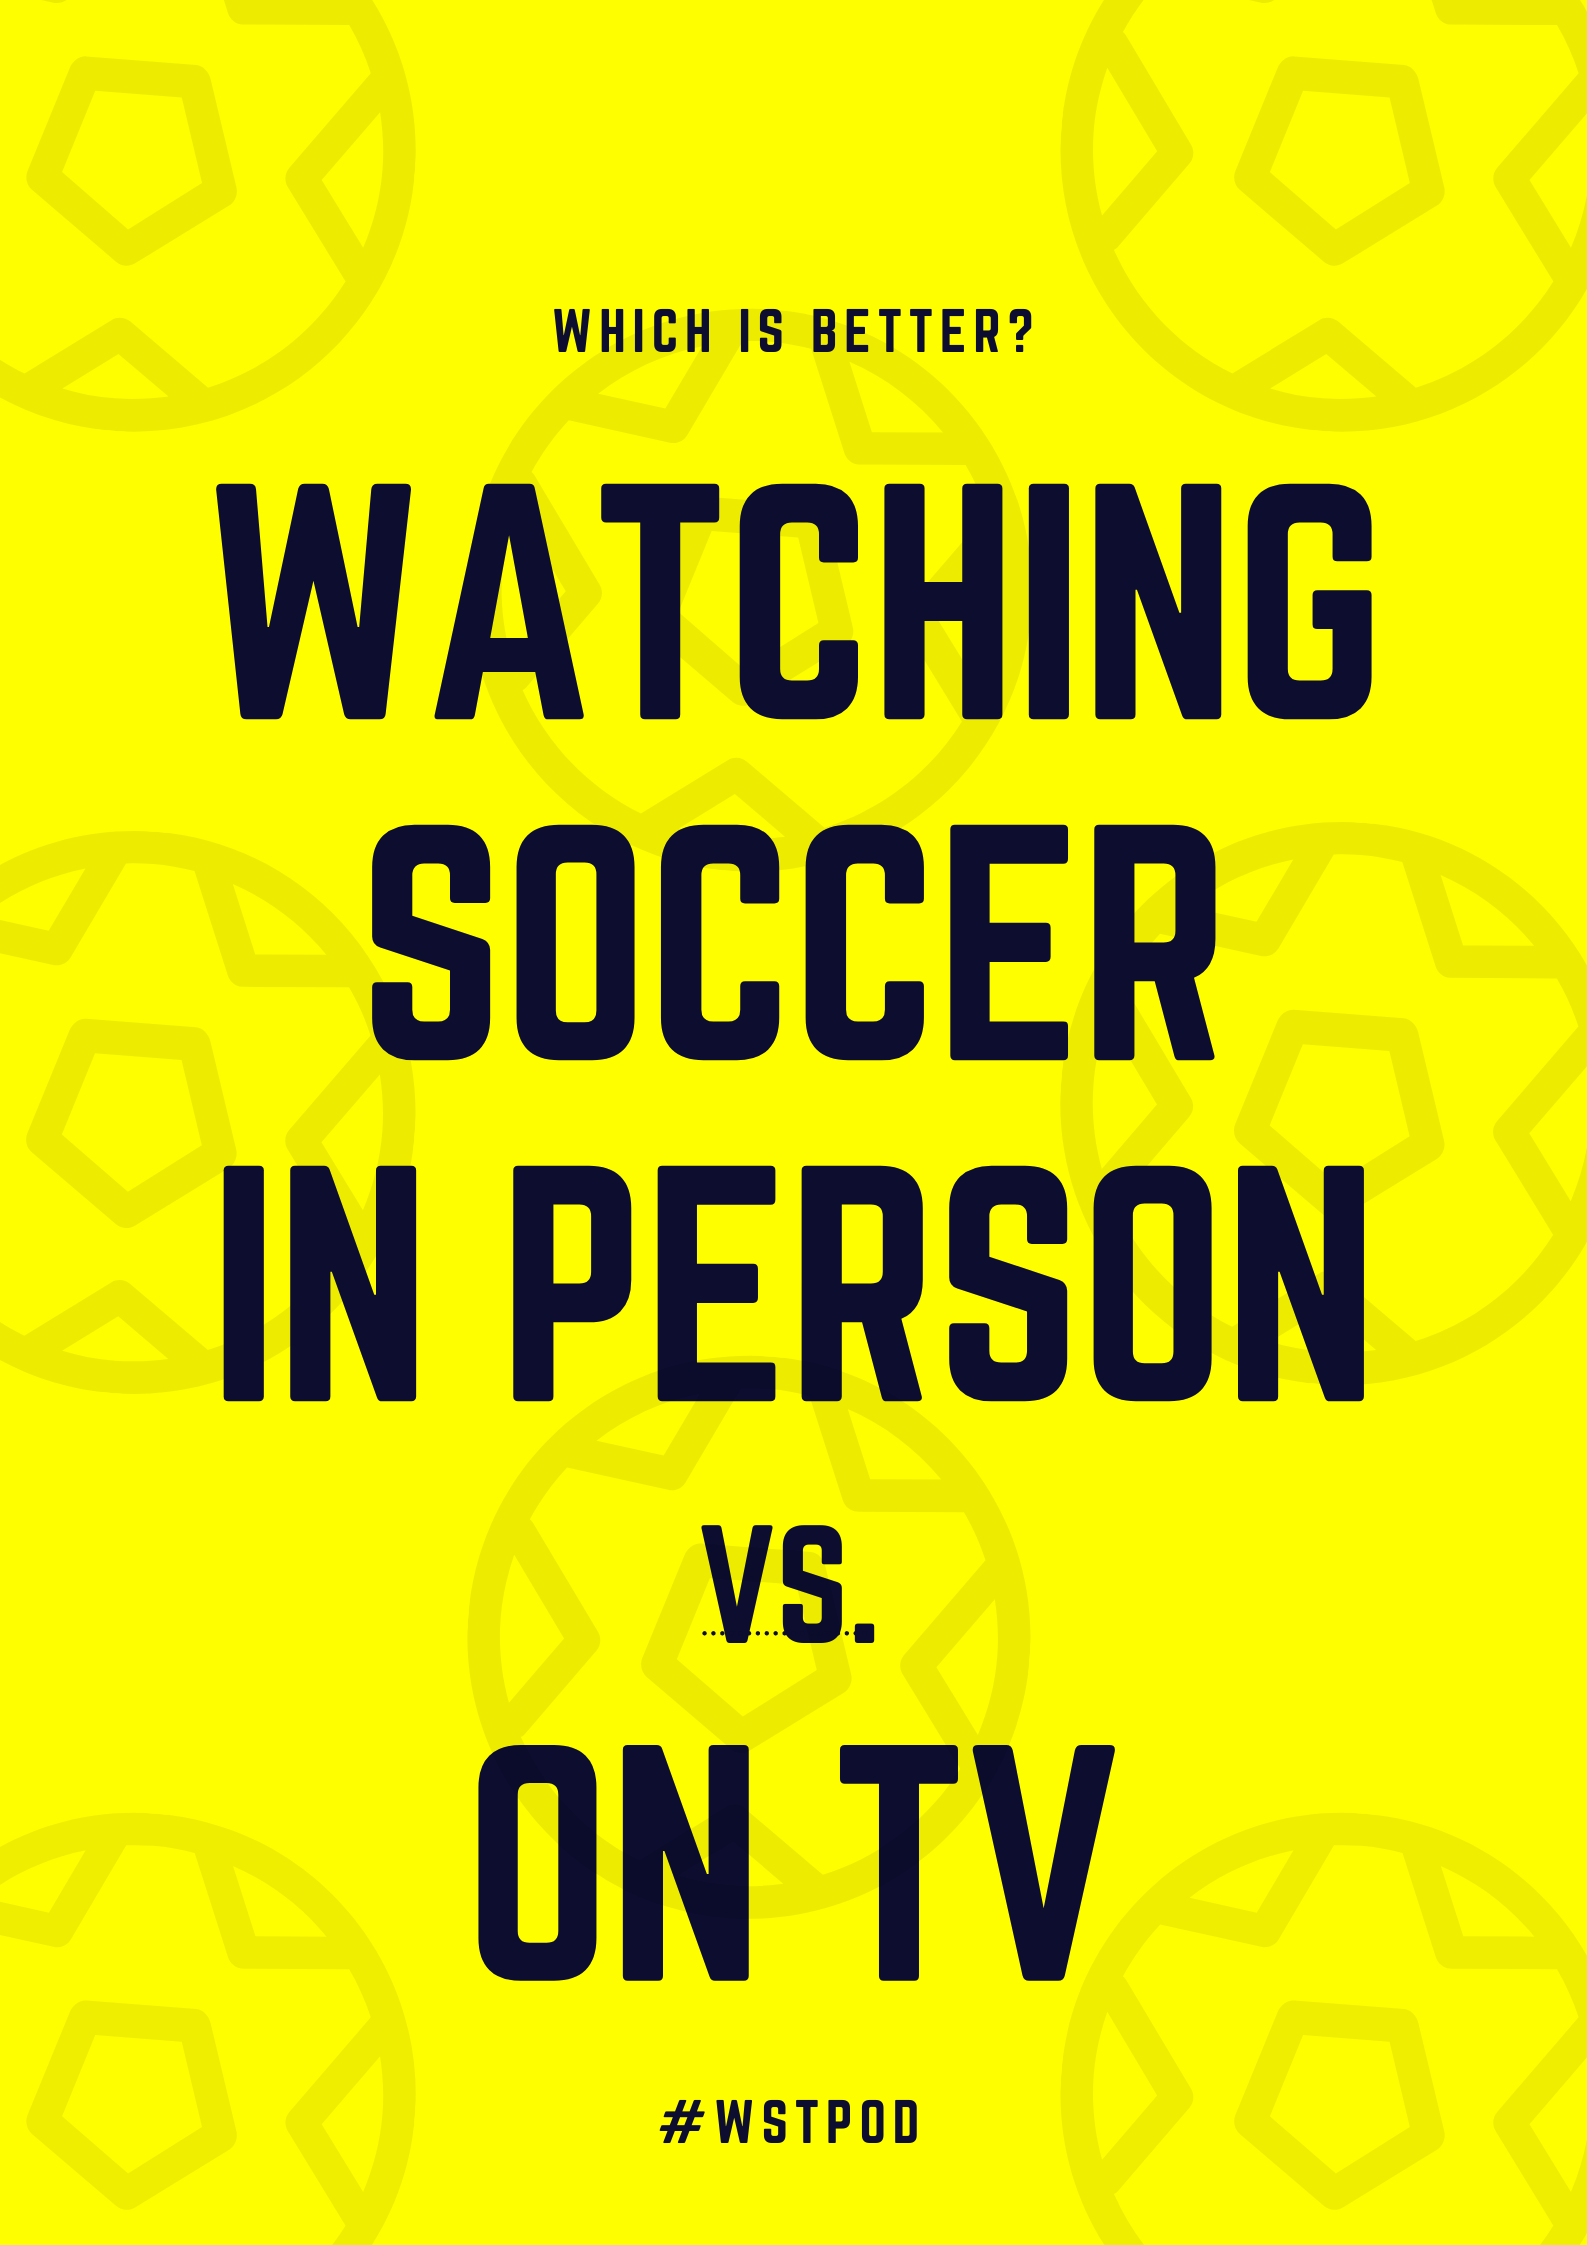 Watching soccer in person or on TV. Which is better?